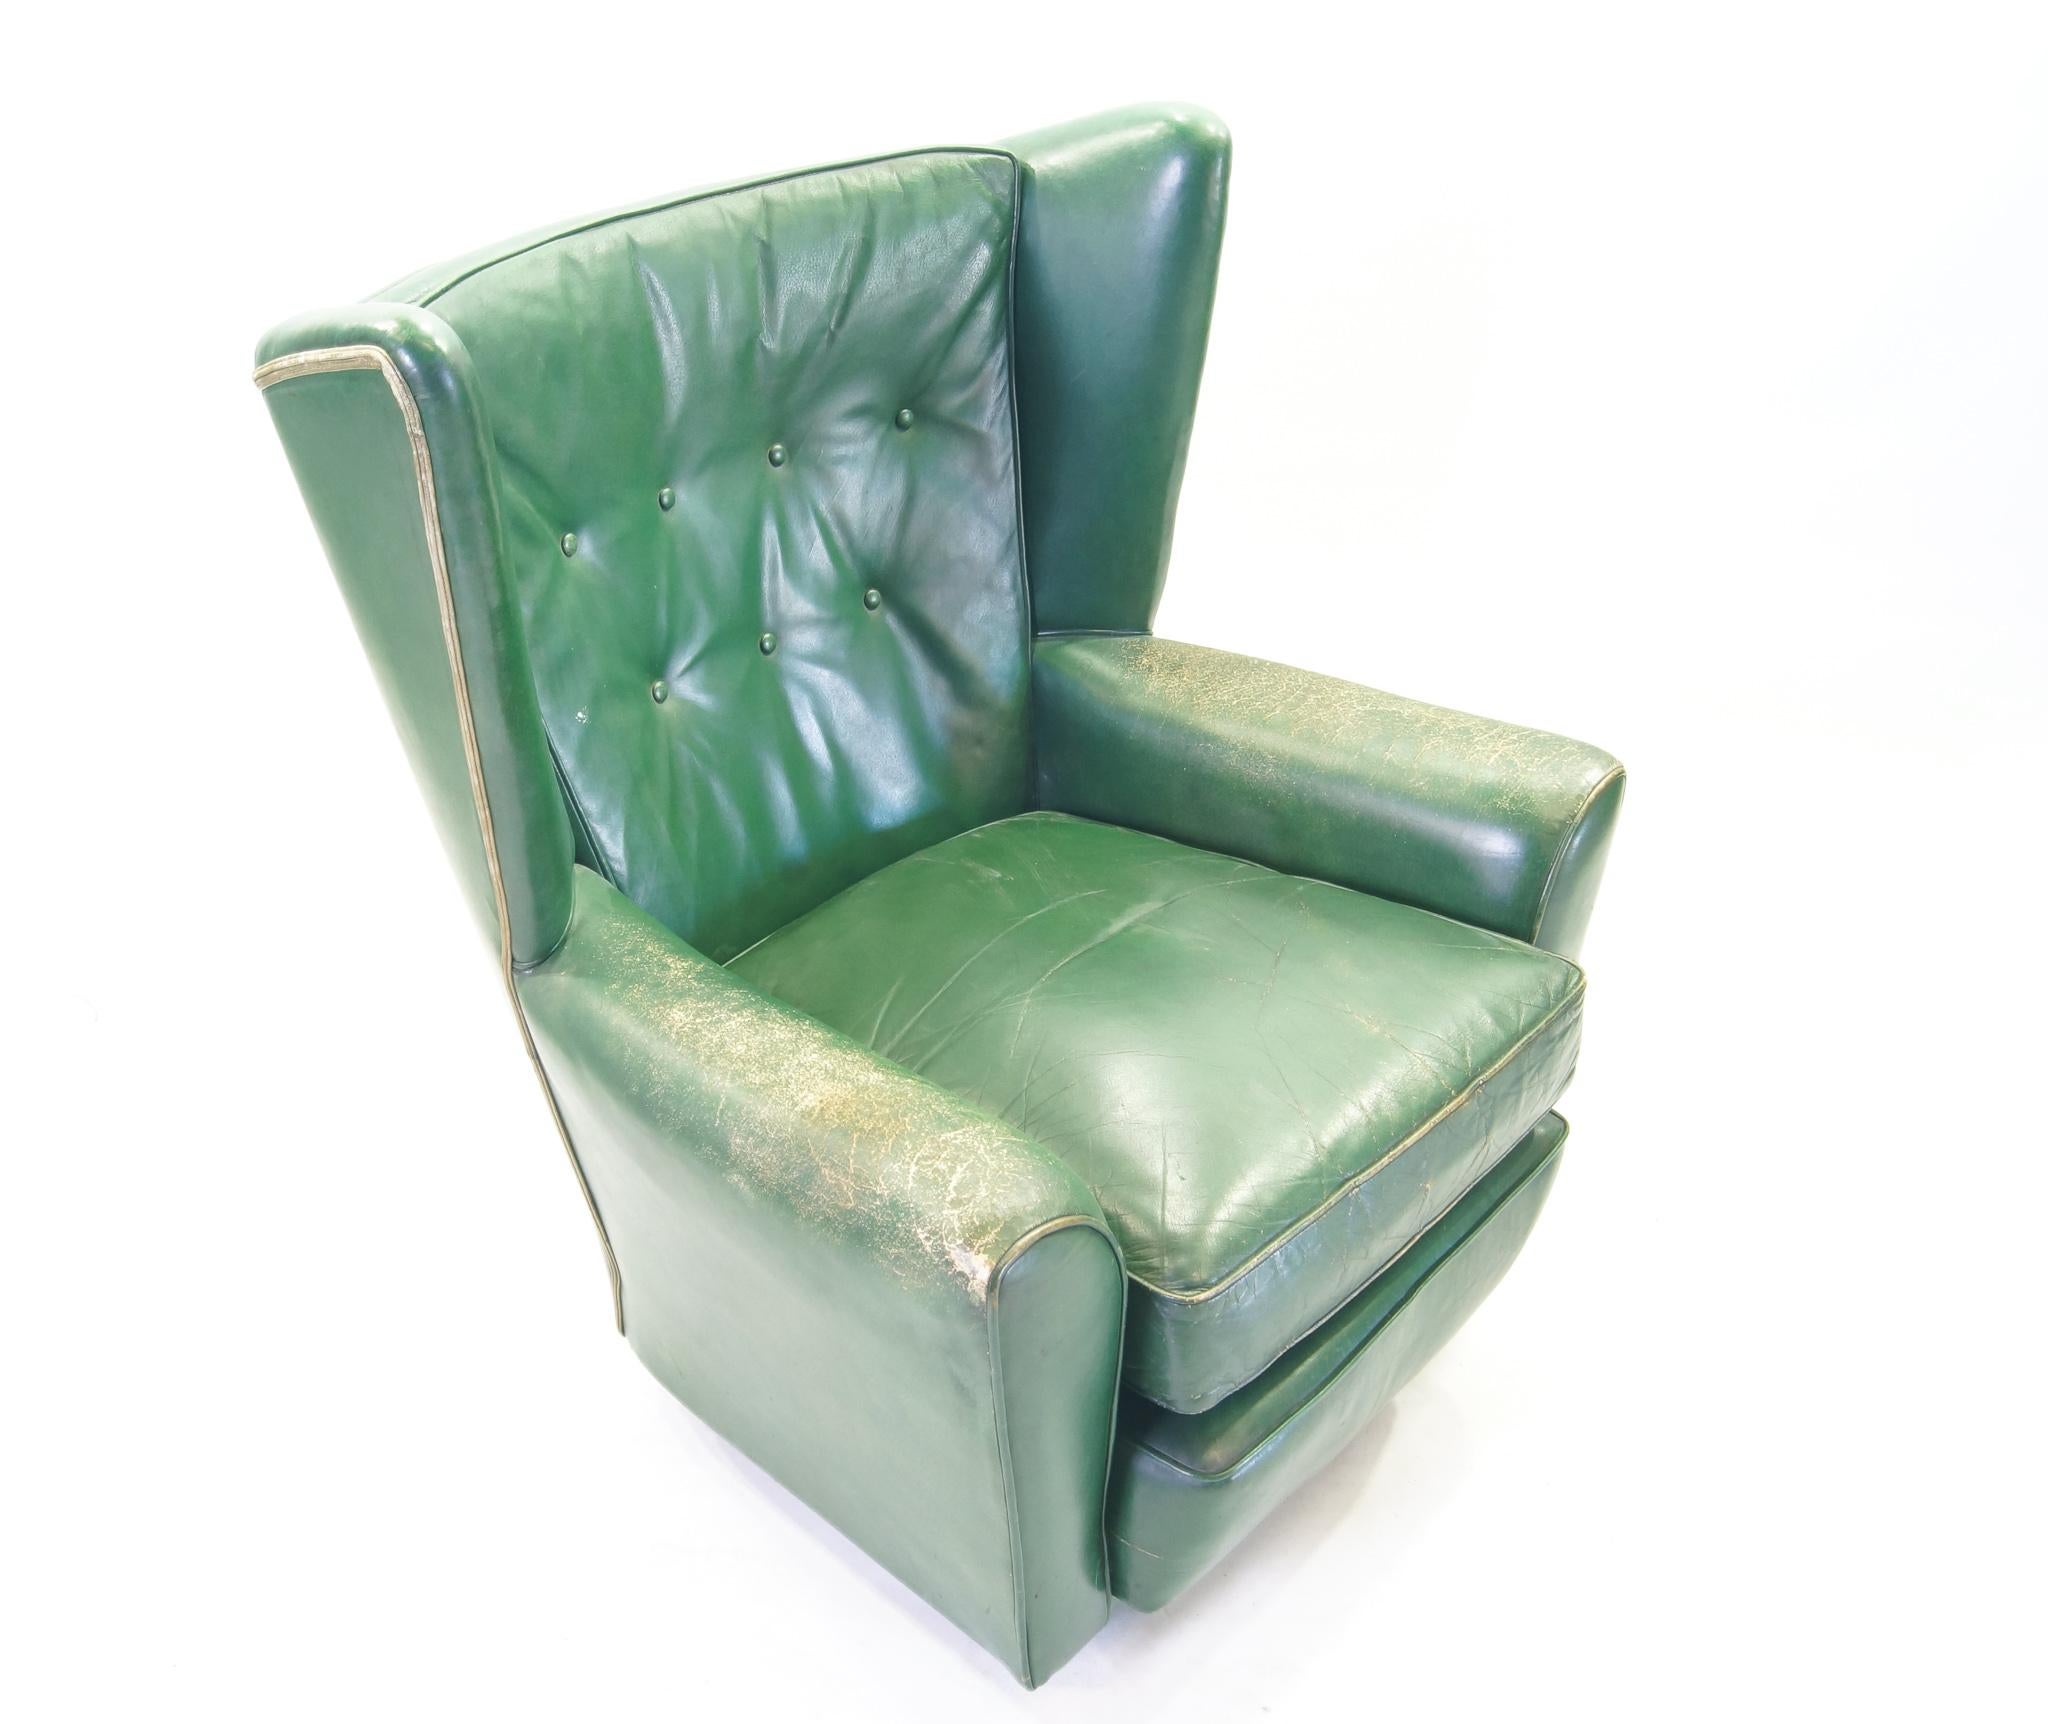 Mid-20th Century Green Leather Club Chairs, Set of 2, Raw Green Leather